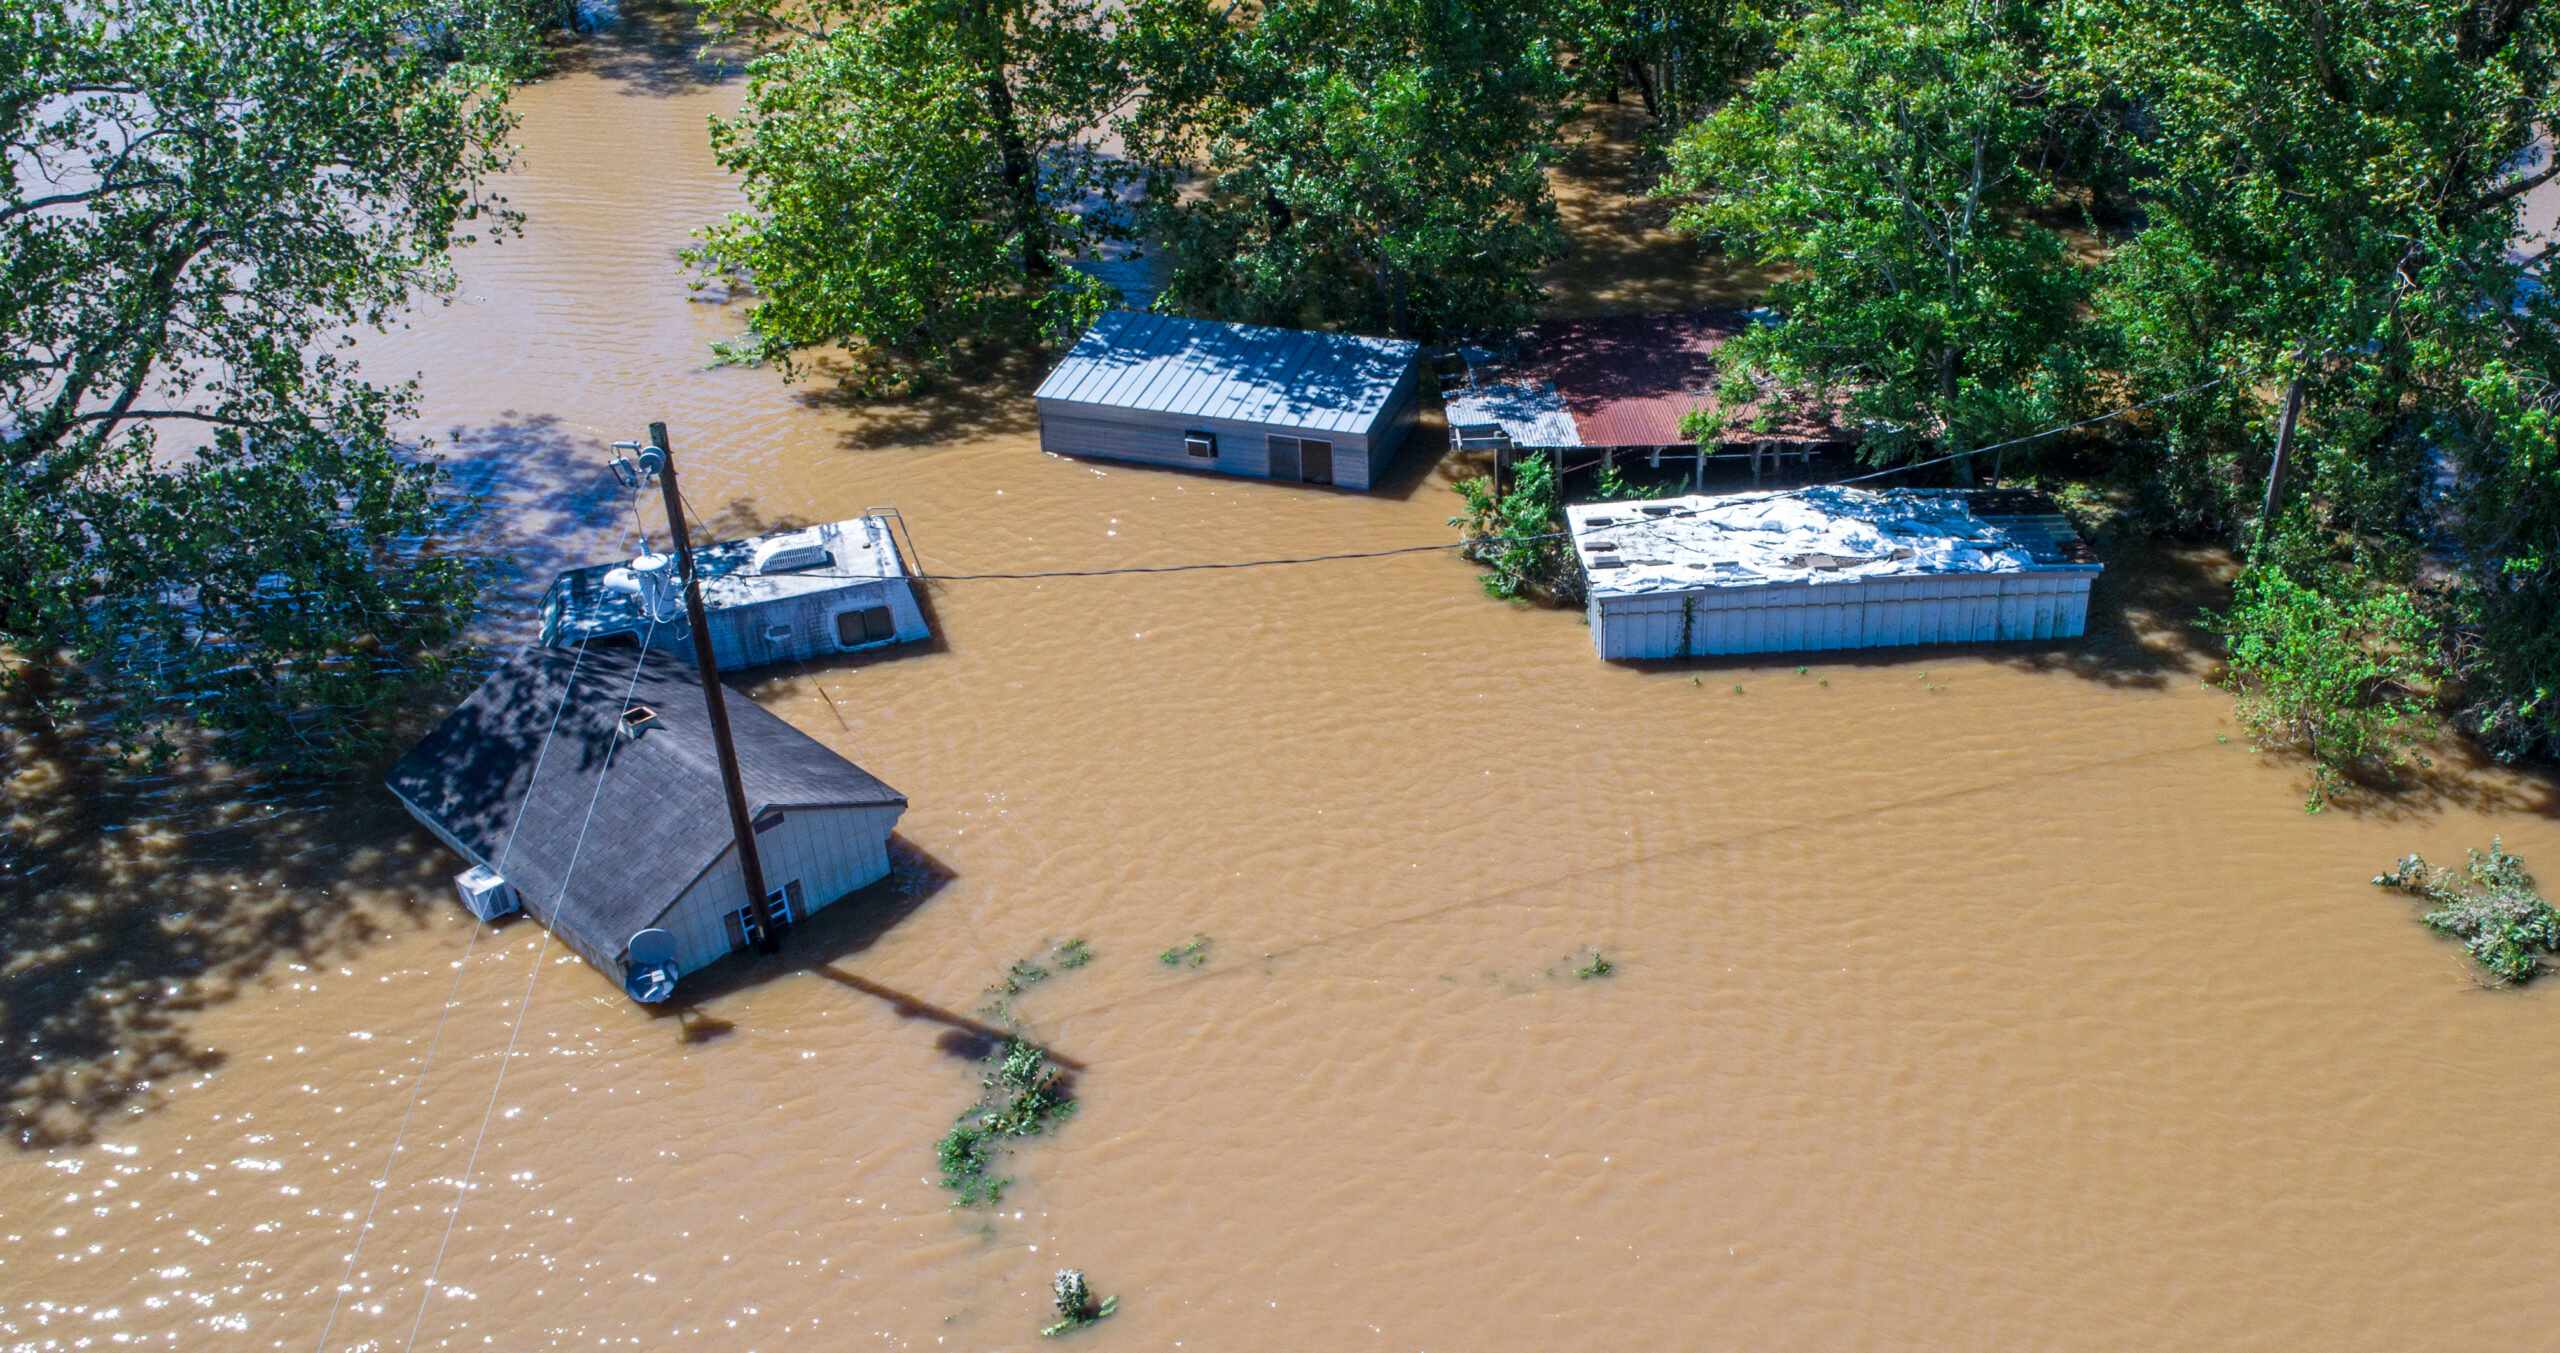 Five small trailer homes are surrounded by - and partially submerged in - floodwaters in this aerial view image